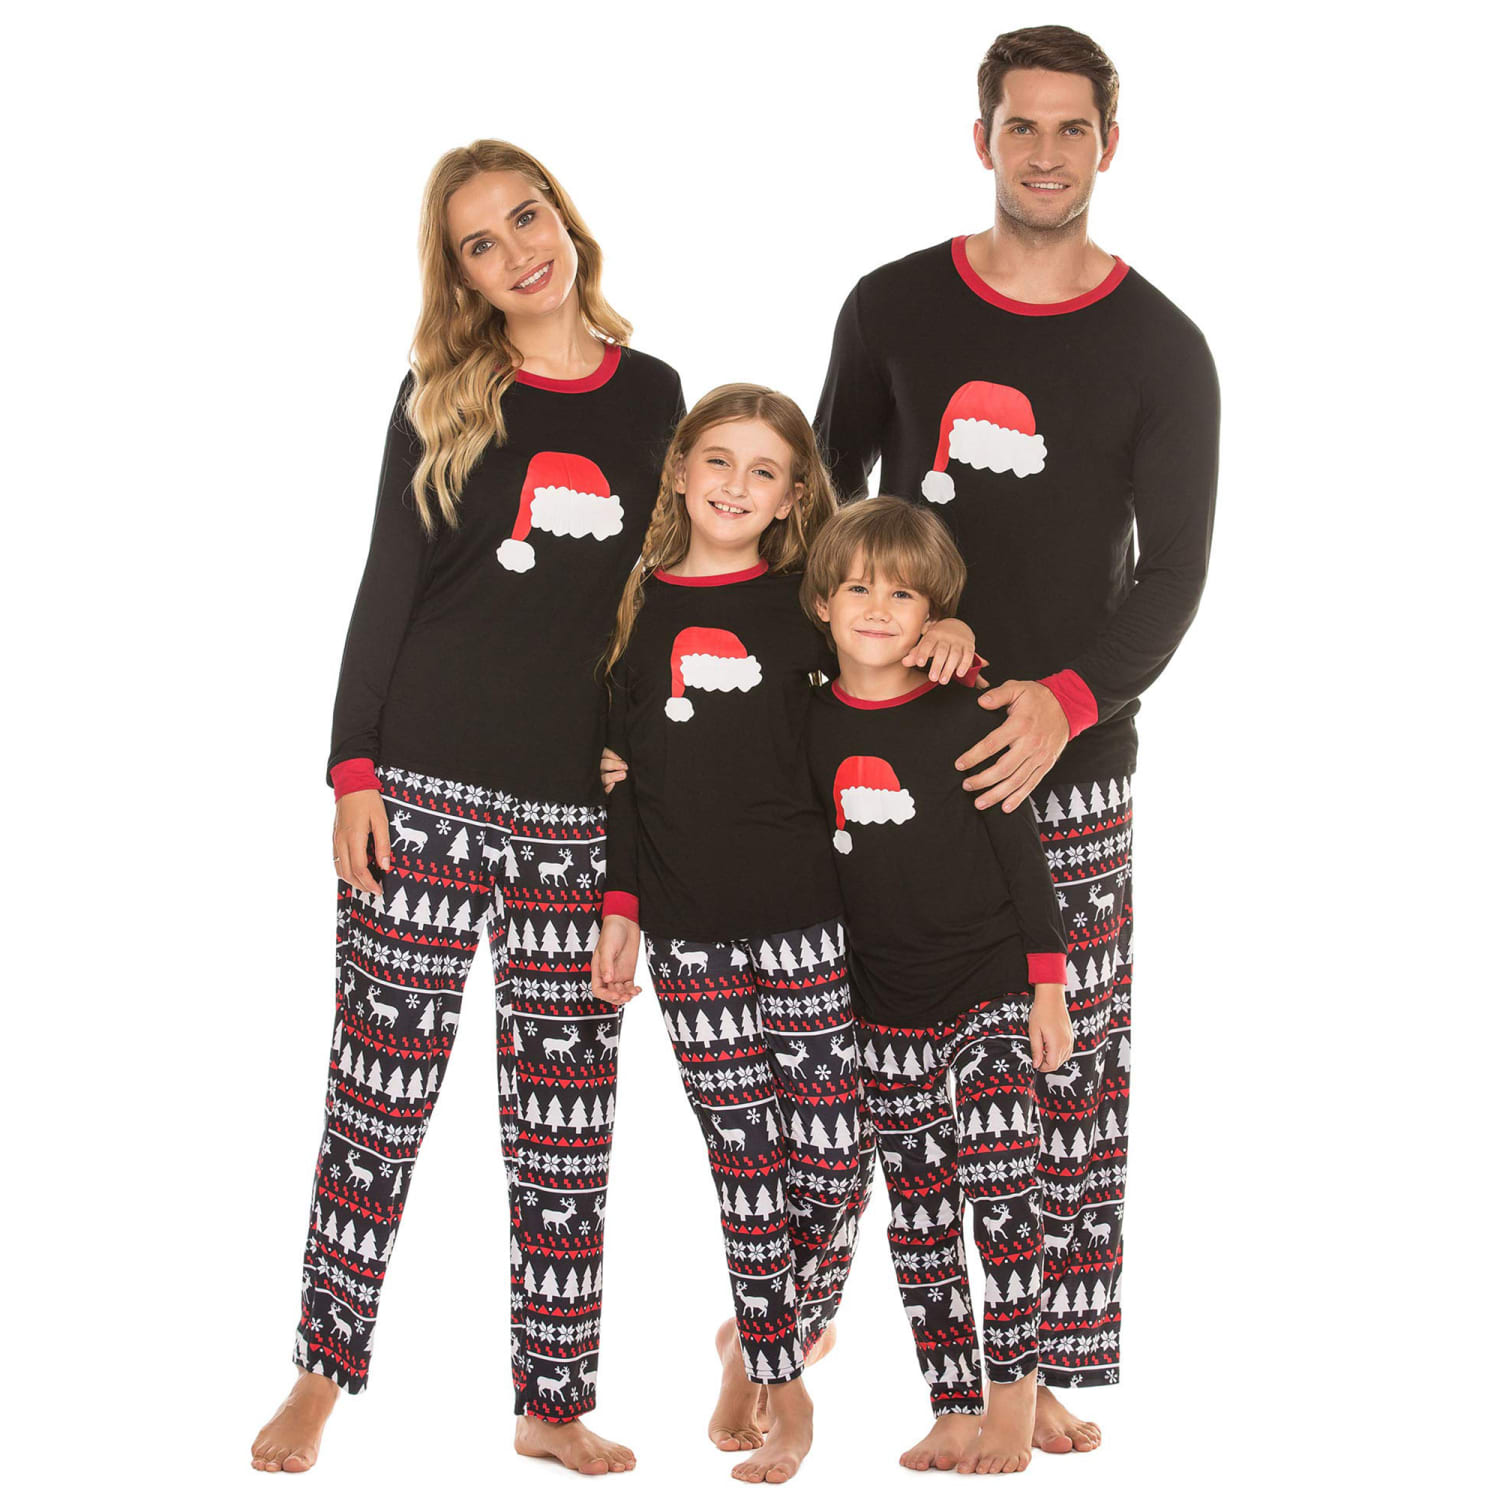 Image result for family wearing matching christmas pjs